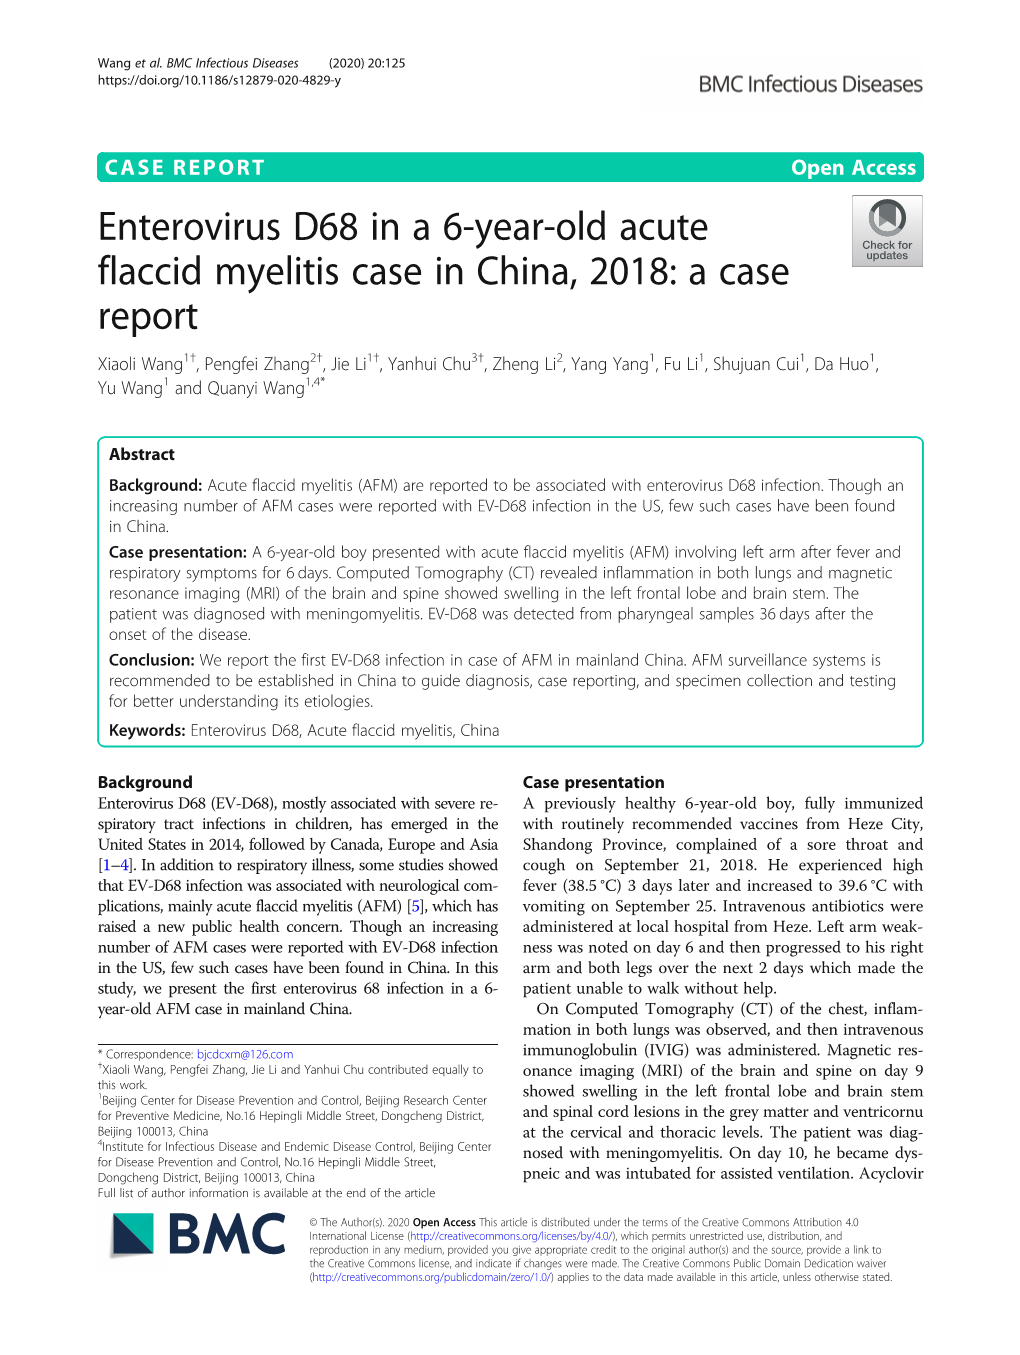 Enterovirus D68 in a 6-Year-Old Acute Flaccid Myelitis Case in China, 2018